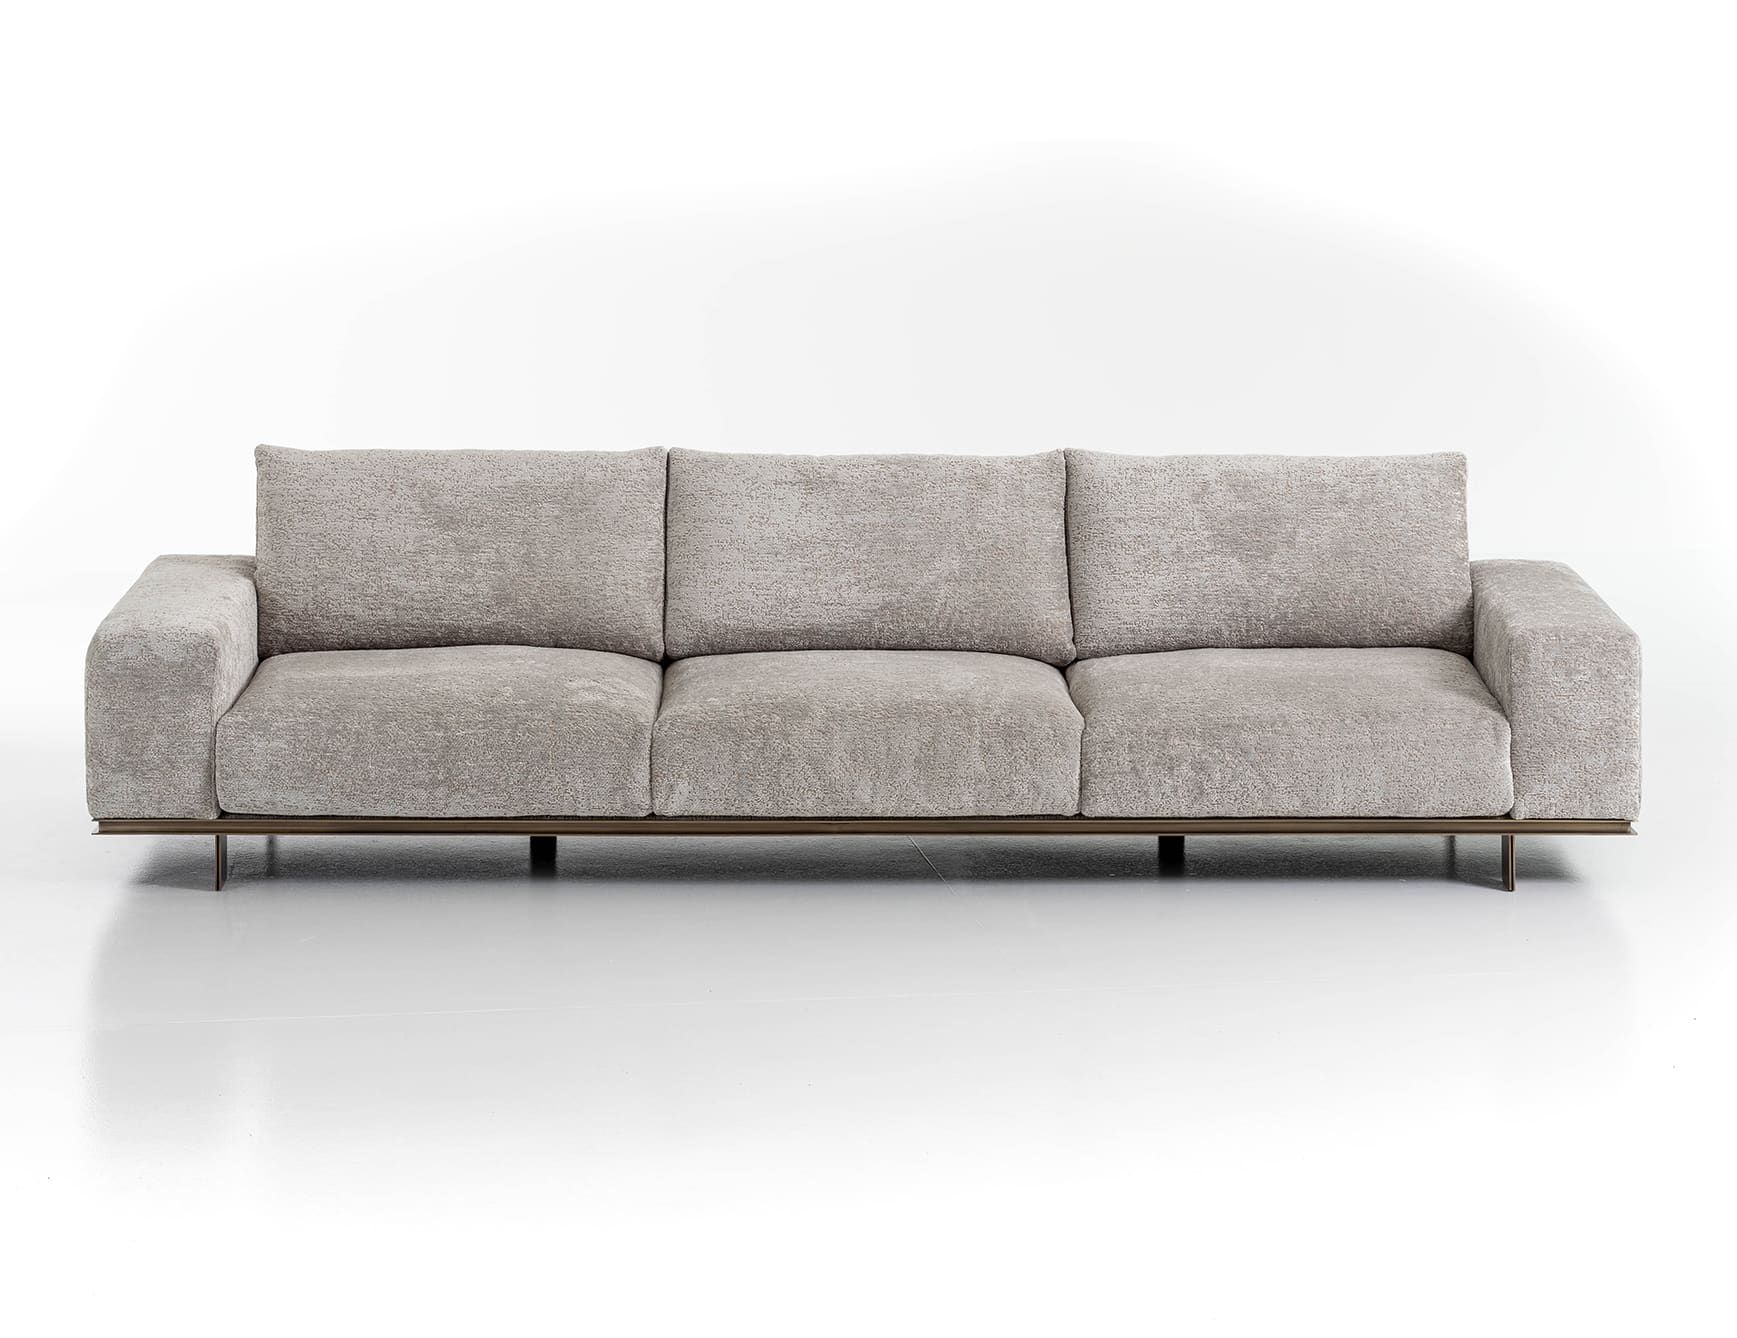 Memphis modern luxury sofa chair with grey leather